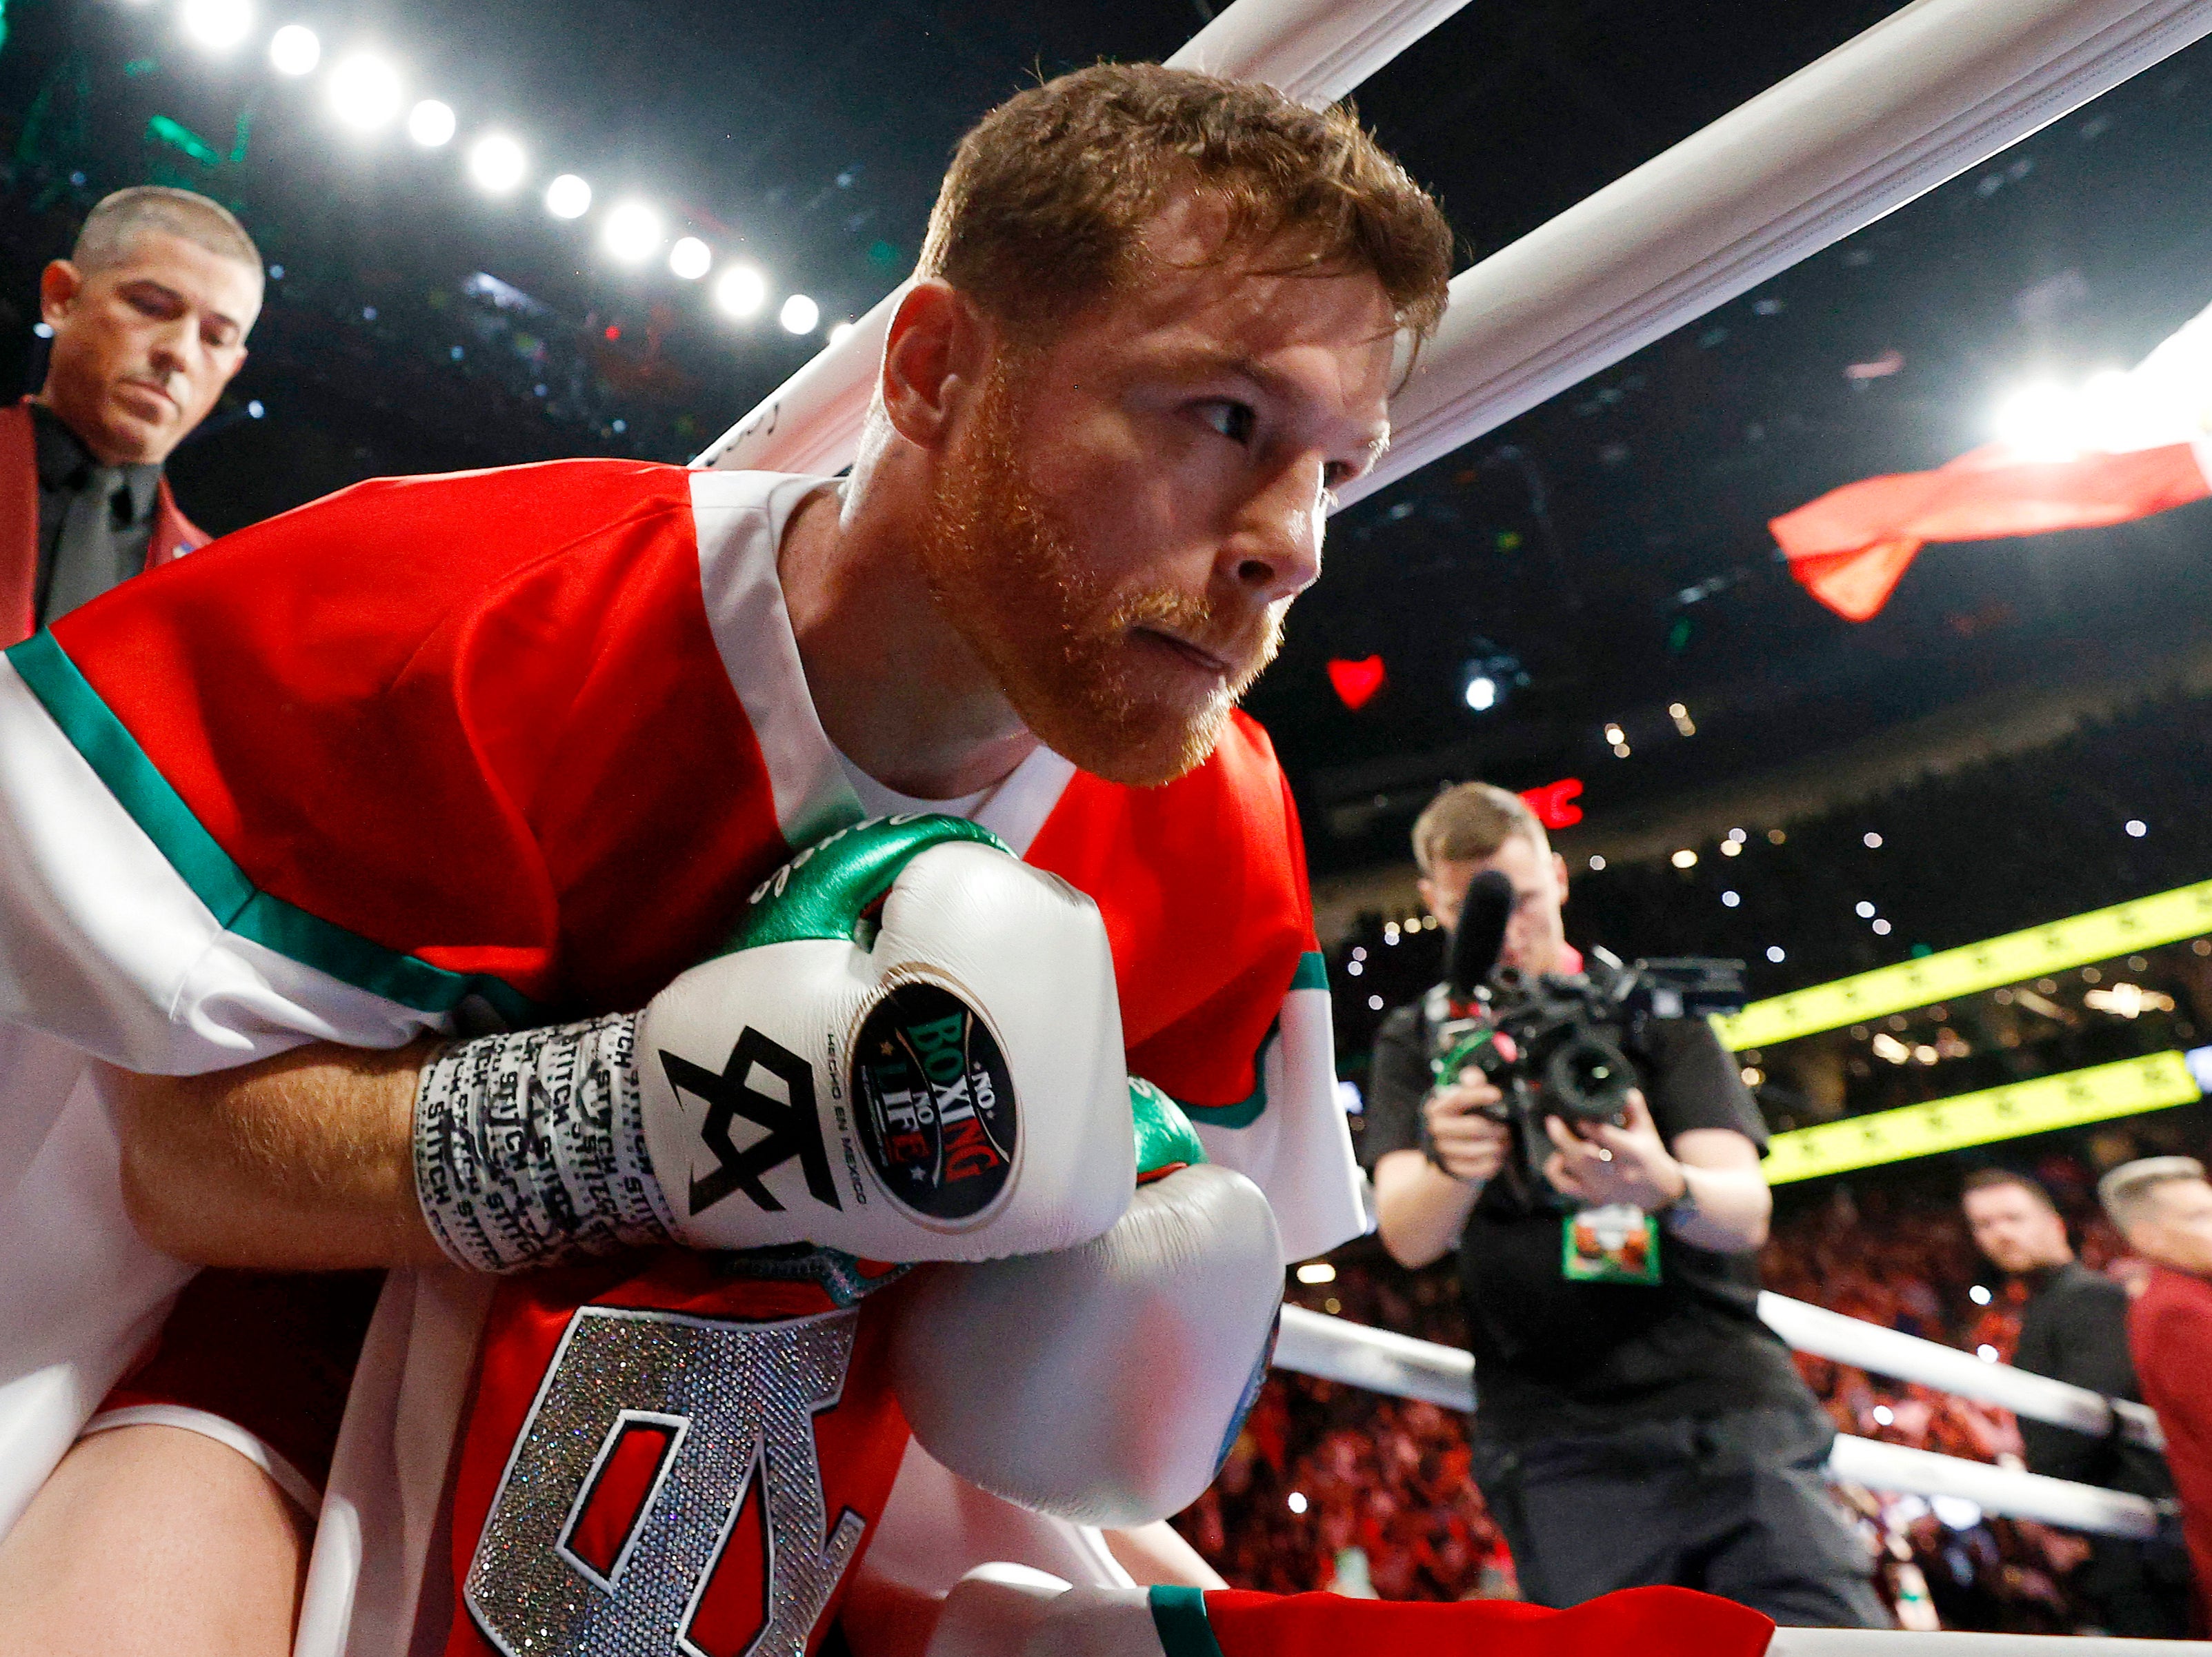 Canelo will be fighting in his home country of Mexico for the first time since 2011